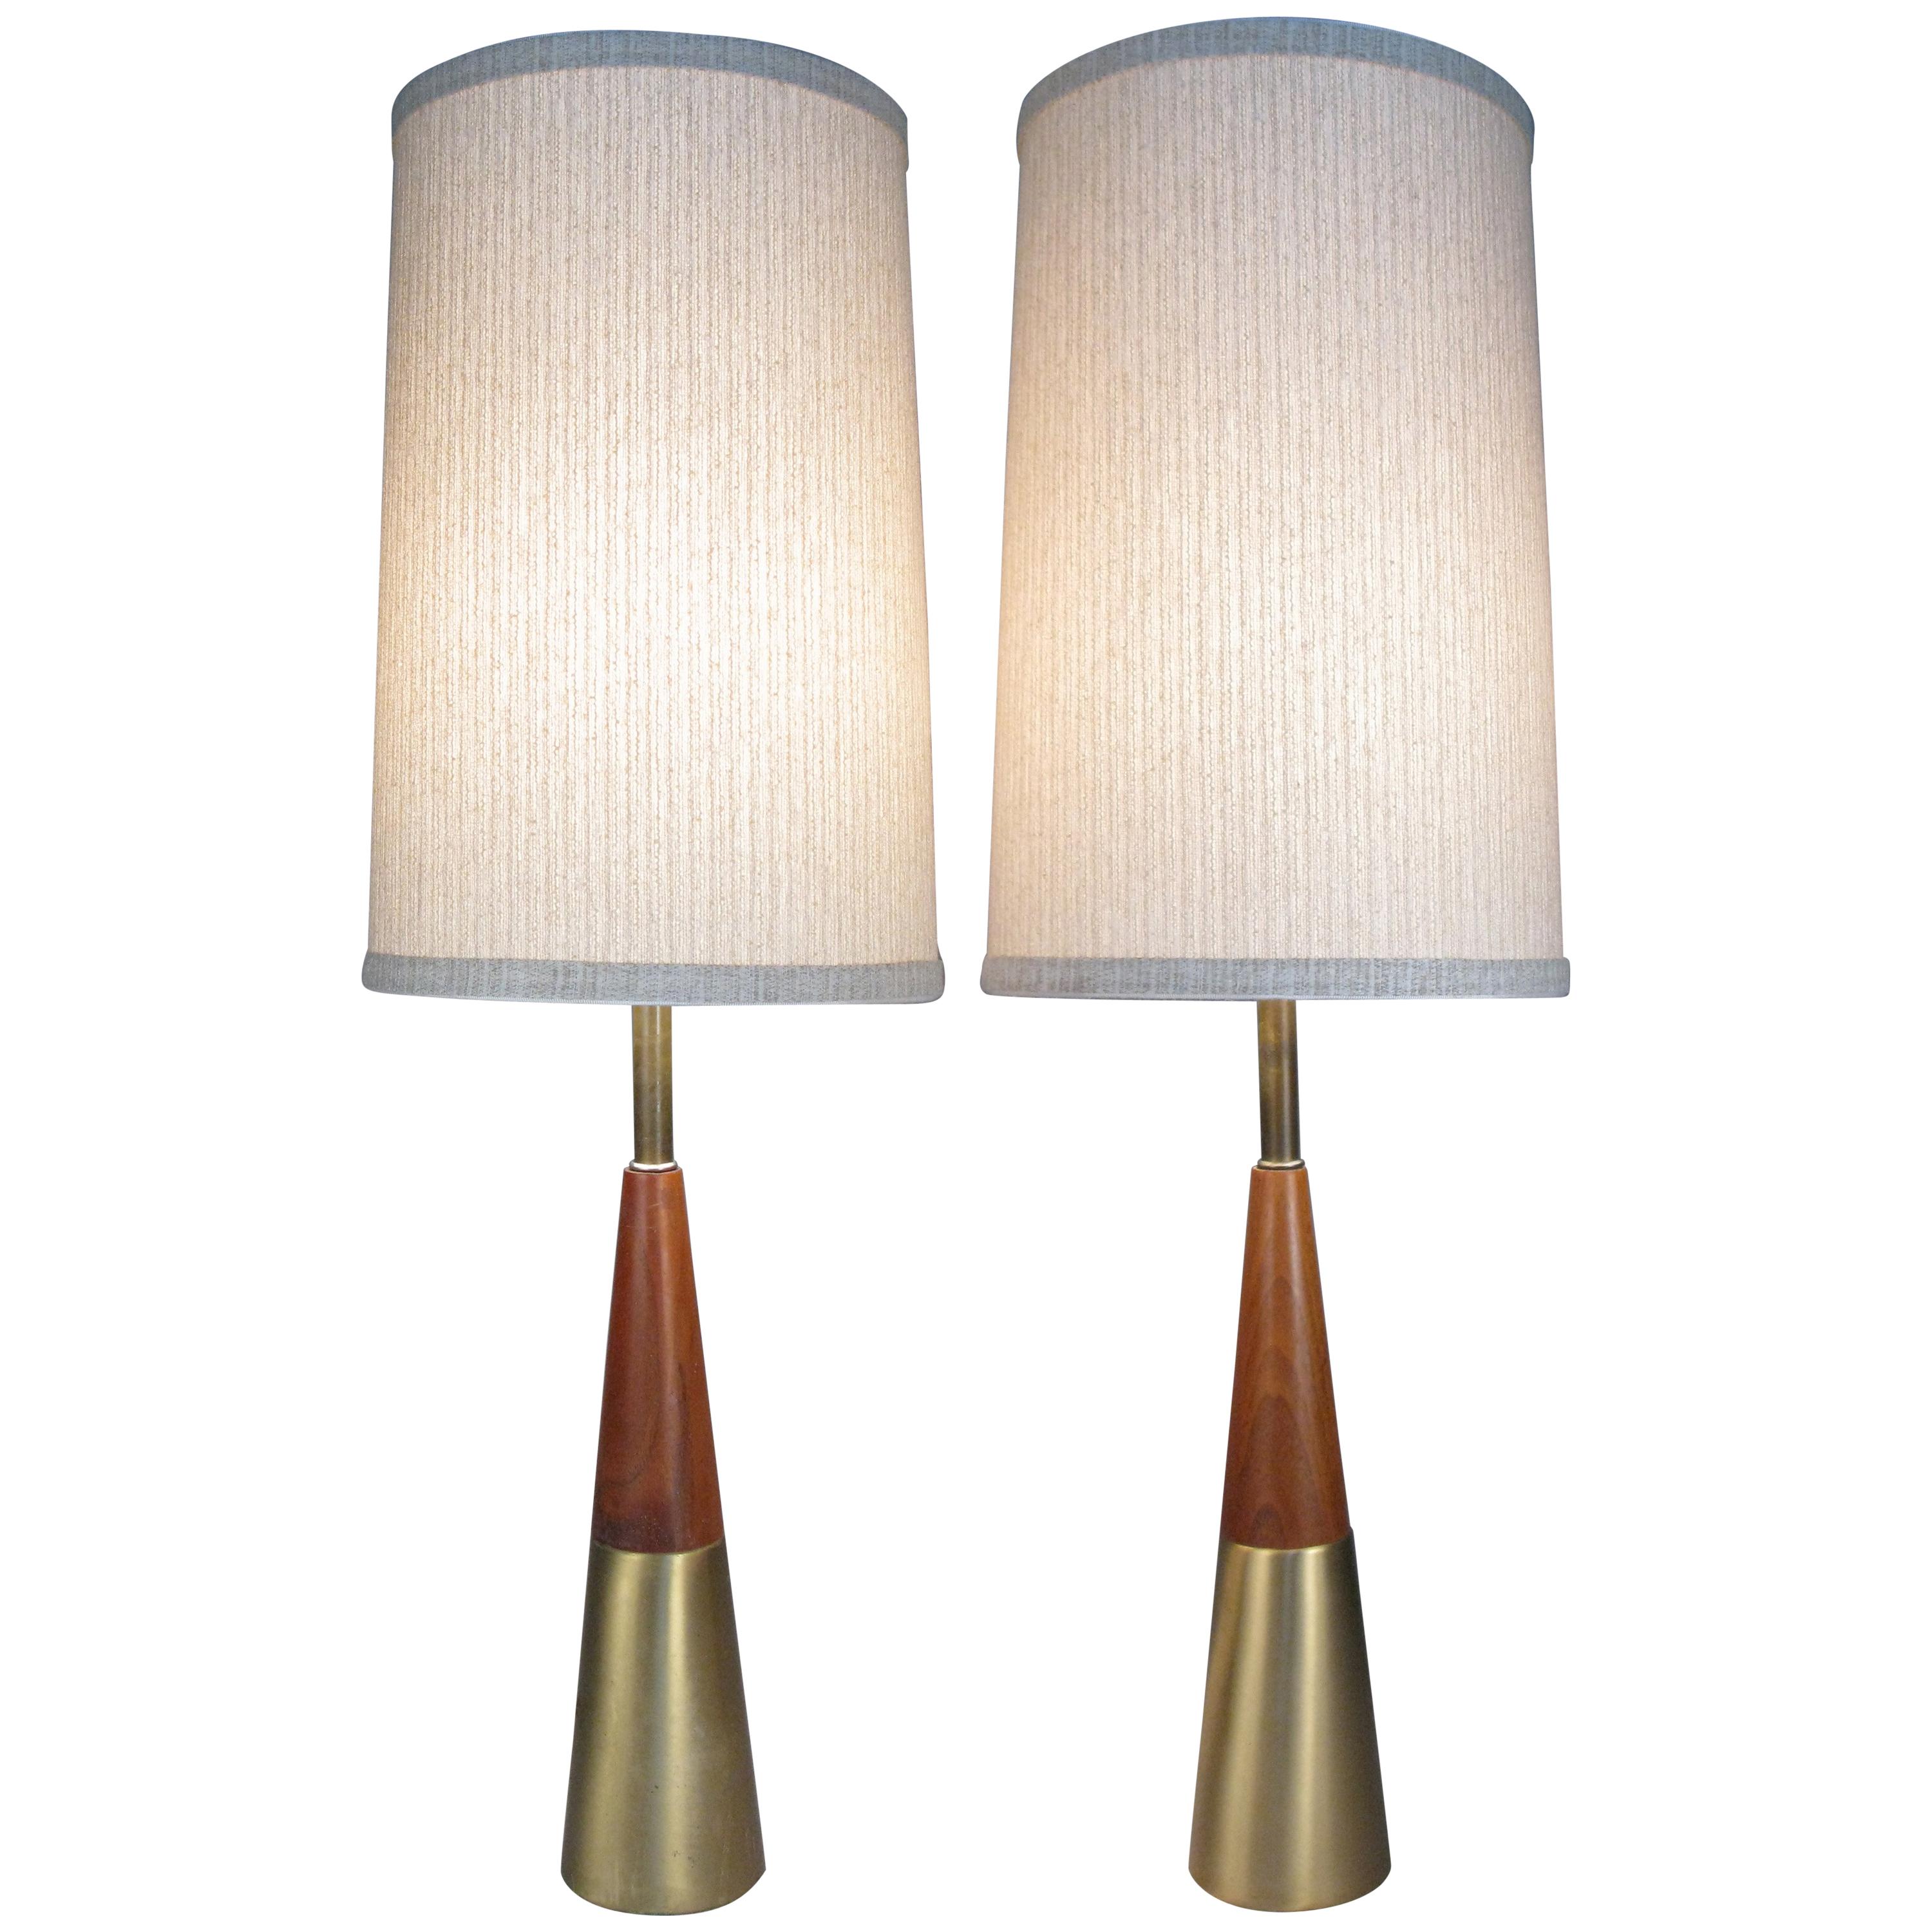 Pair of Walnut and Brass Lamps by Tony Paul